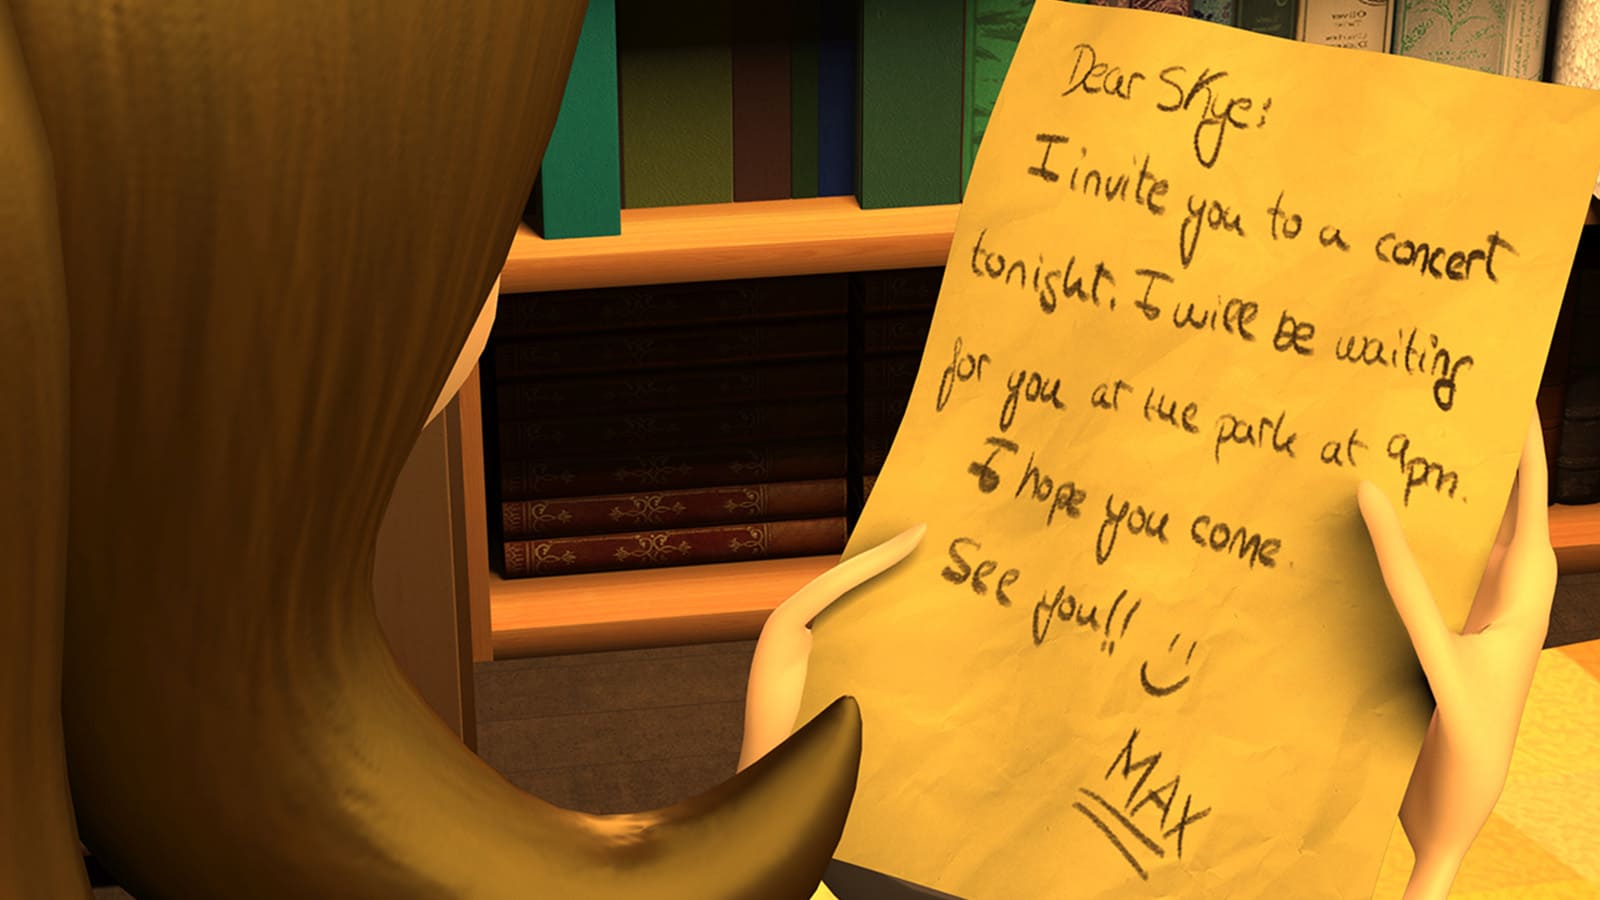 Skye, the protagonist, reads a paper note inviting her to a concert, filling her with excitement about the upcoming date.